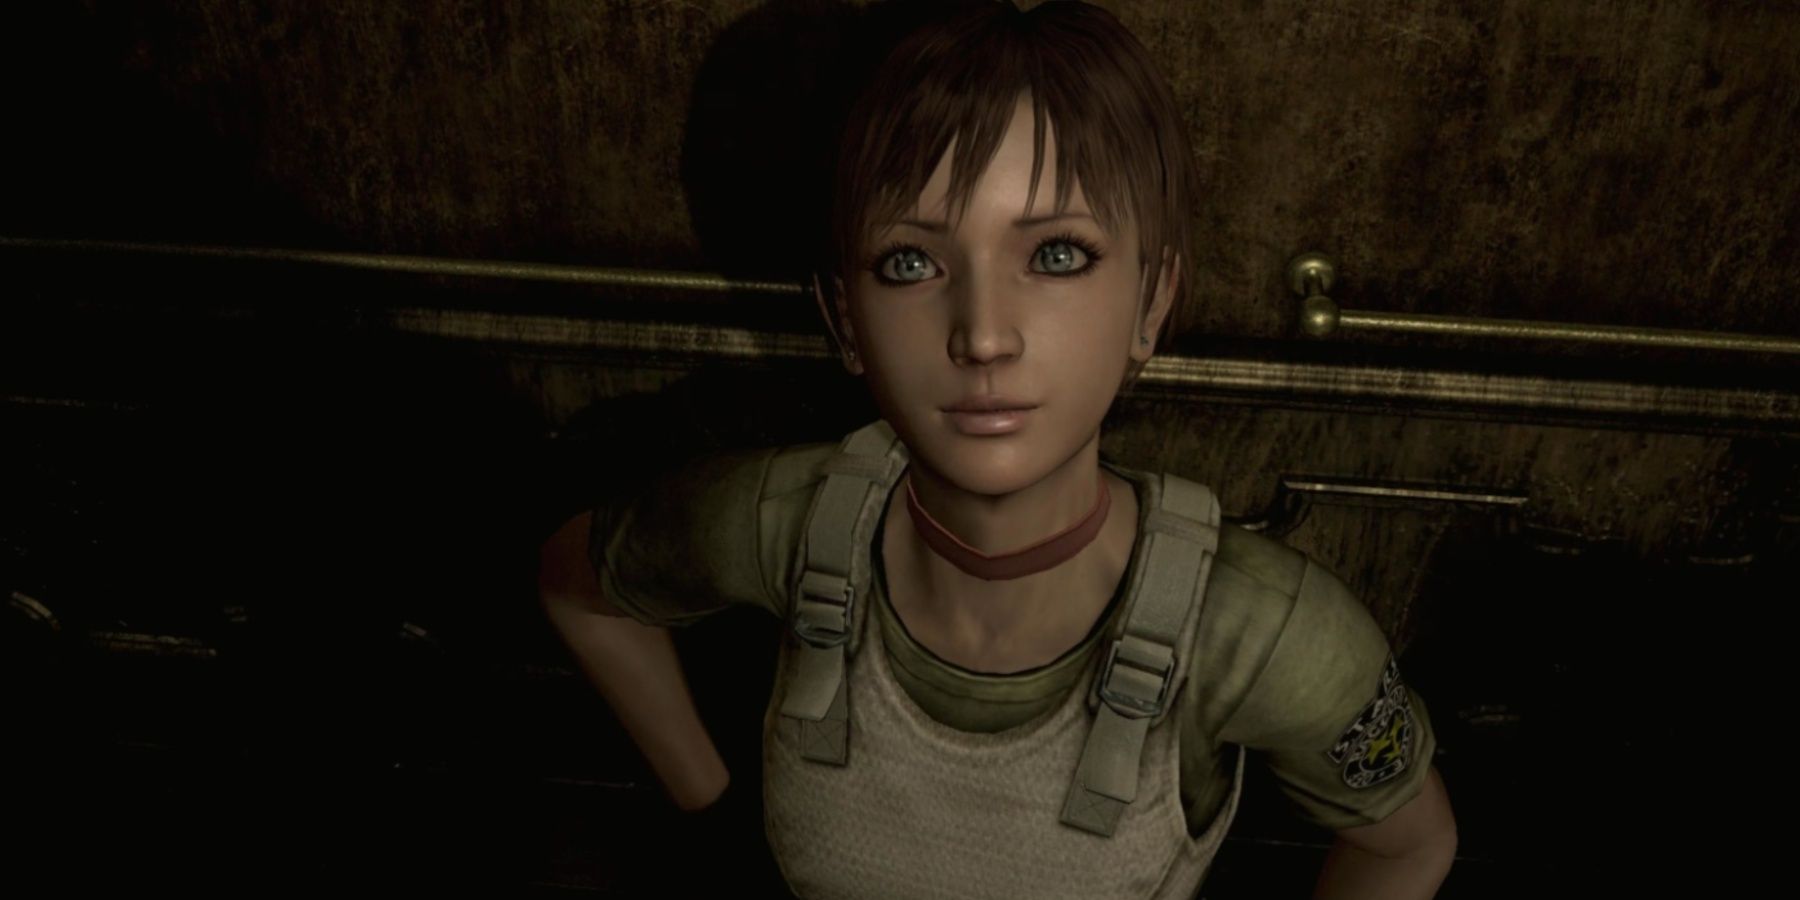 Resident Evil Zero Rebecca looking up at viewer while leaning on a wall